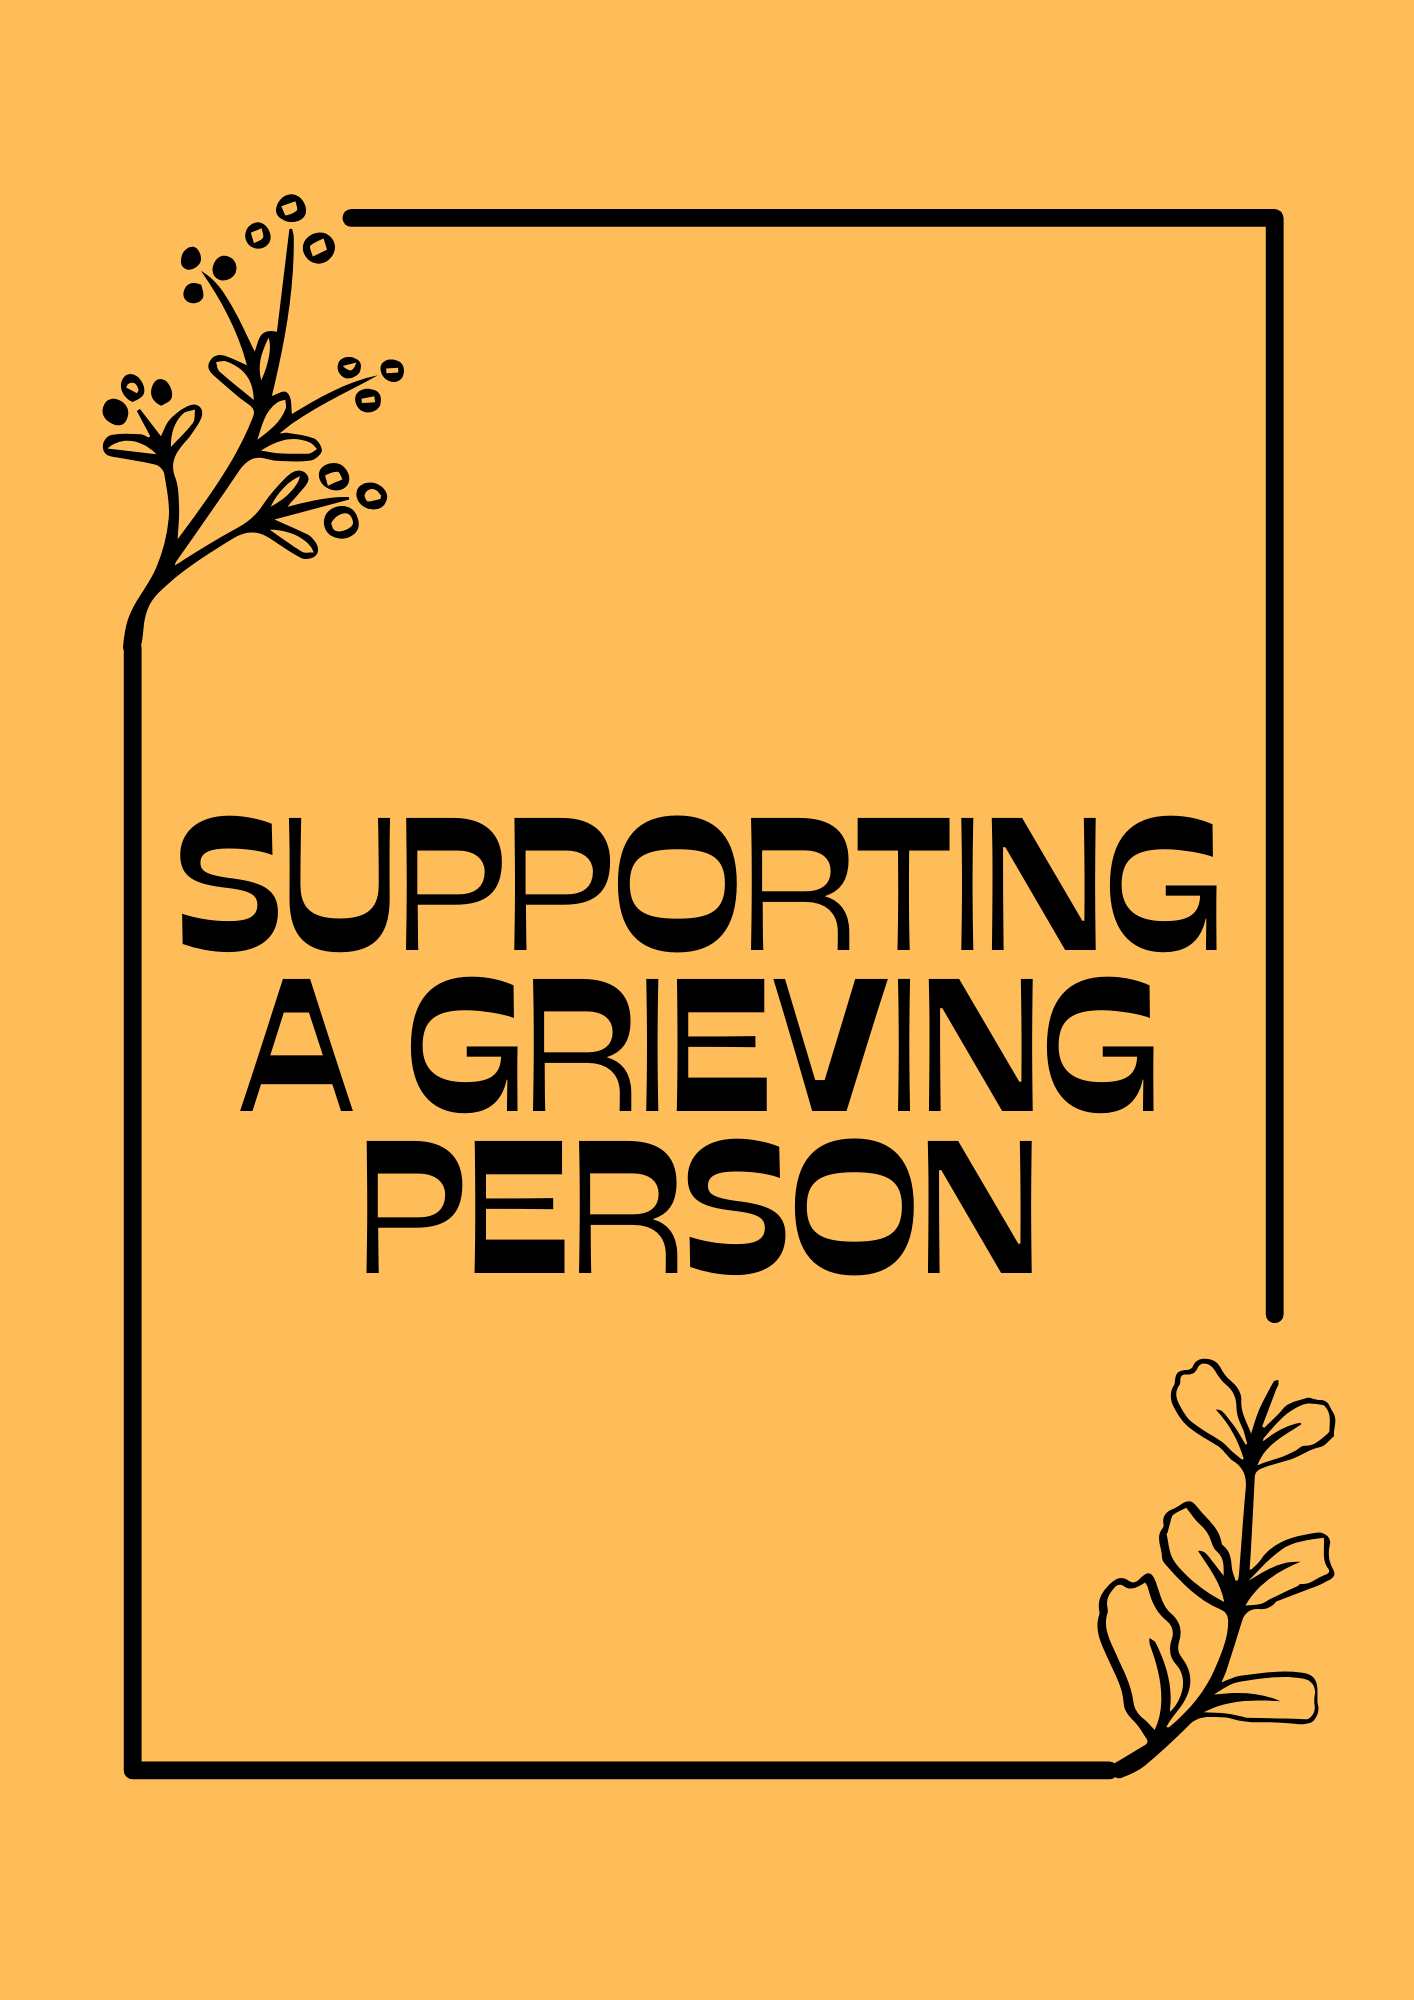 Supporting a grieving person